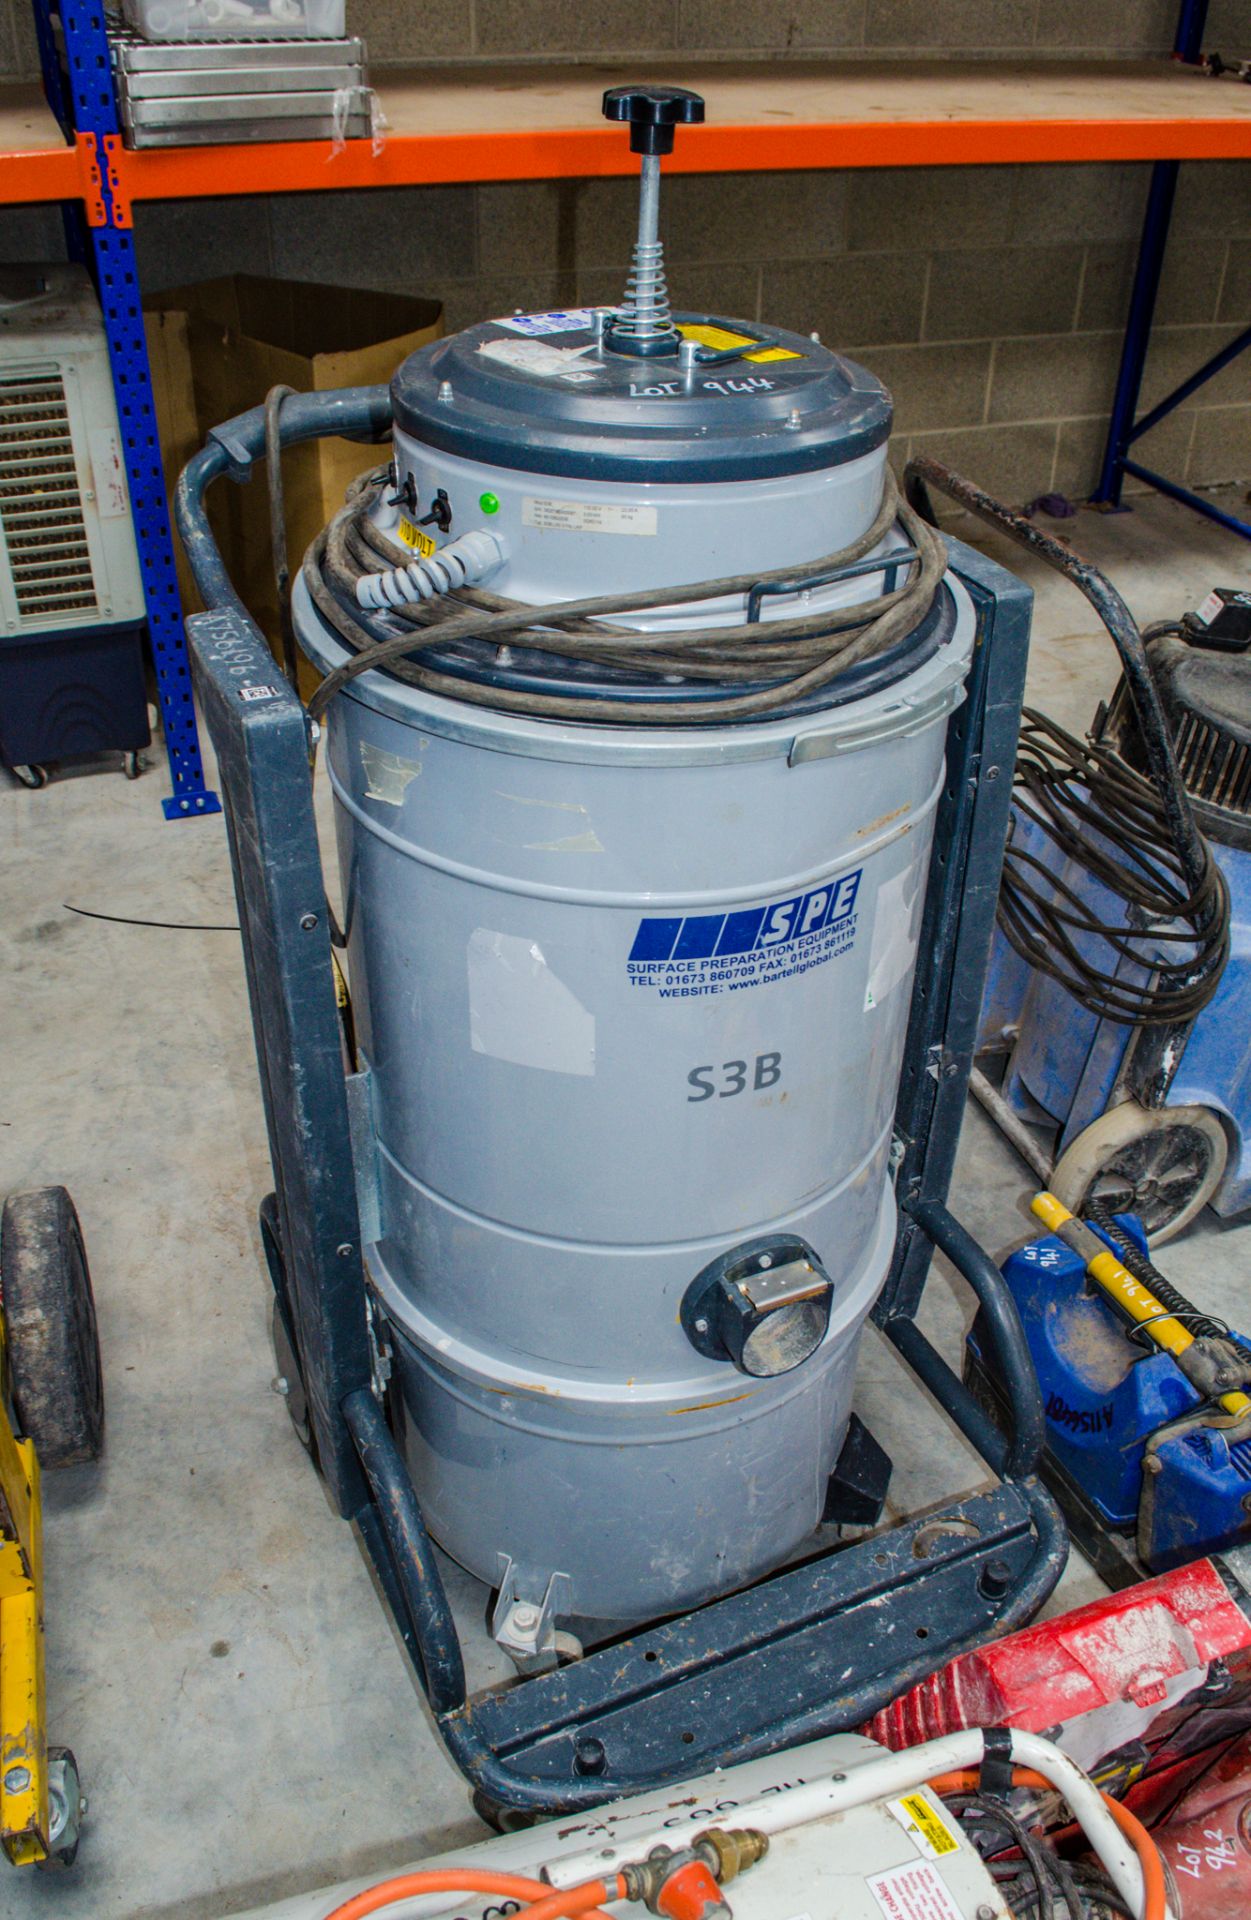 SPE S3B 110v industrial vacuum cleaner A1089009